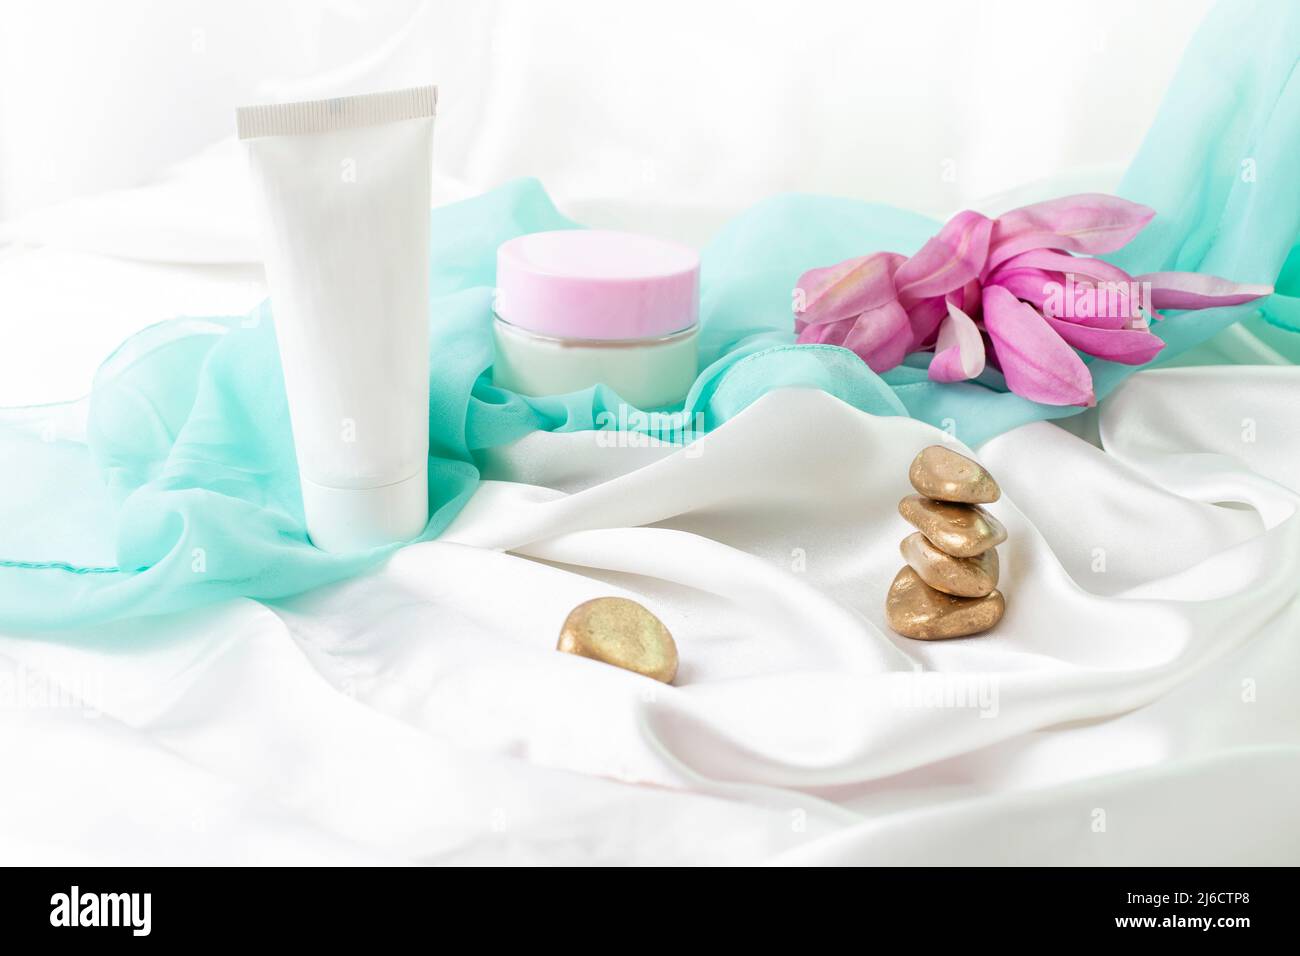 tube and jar without label, product mockup for skin care products, with white satin golden zen stones and magnolia flowers Stock Photo